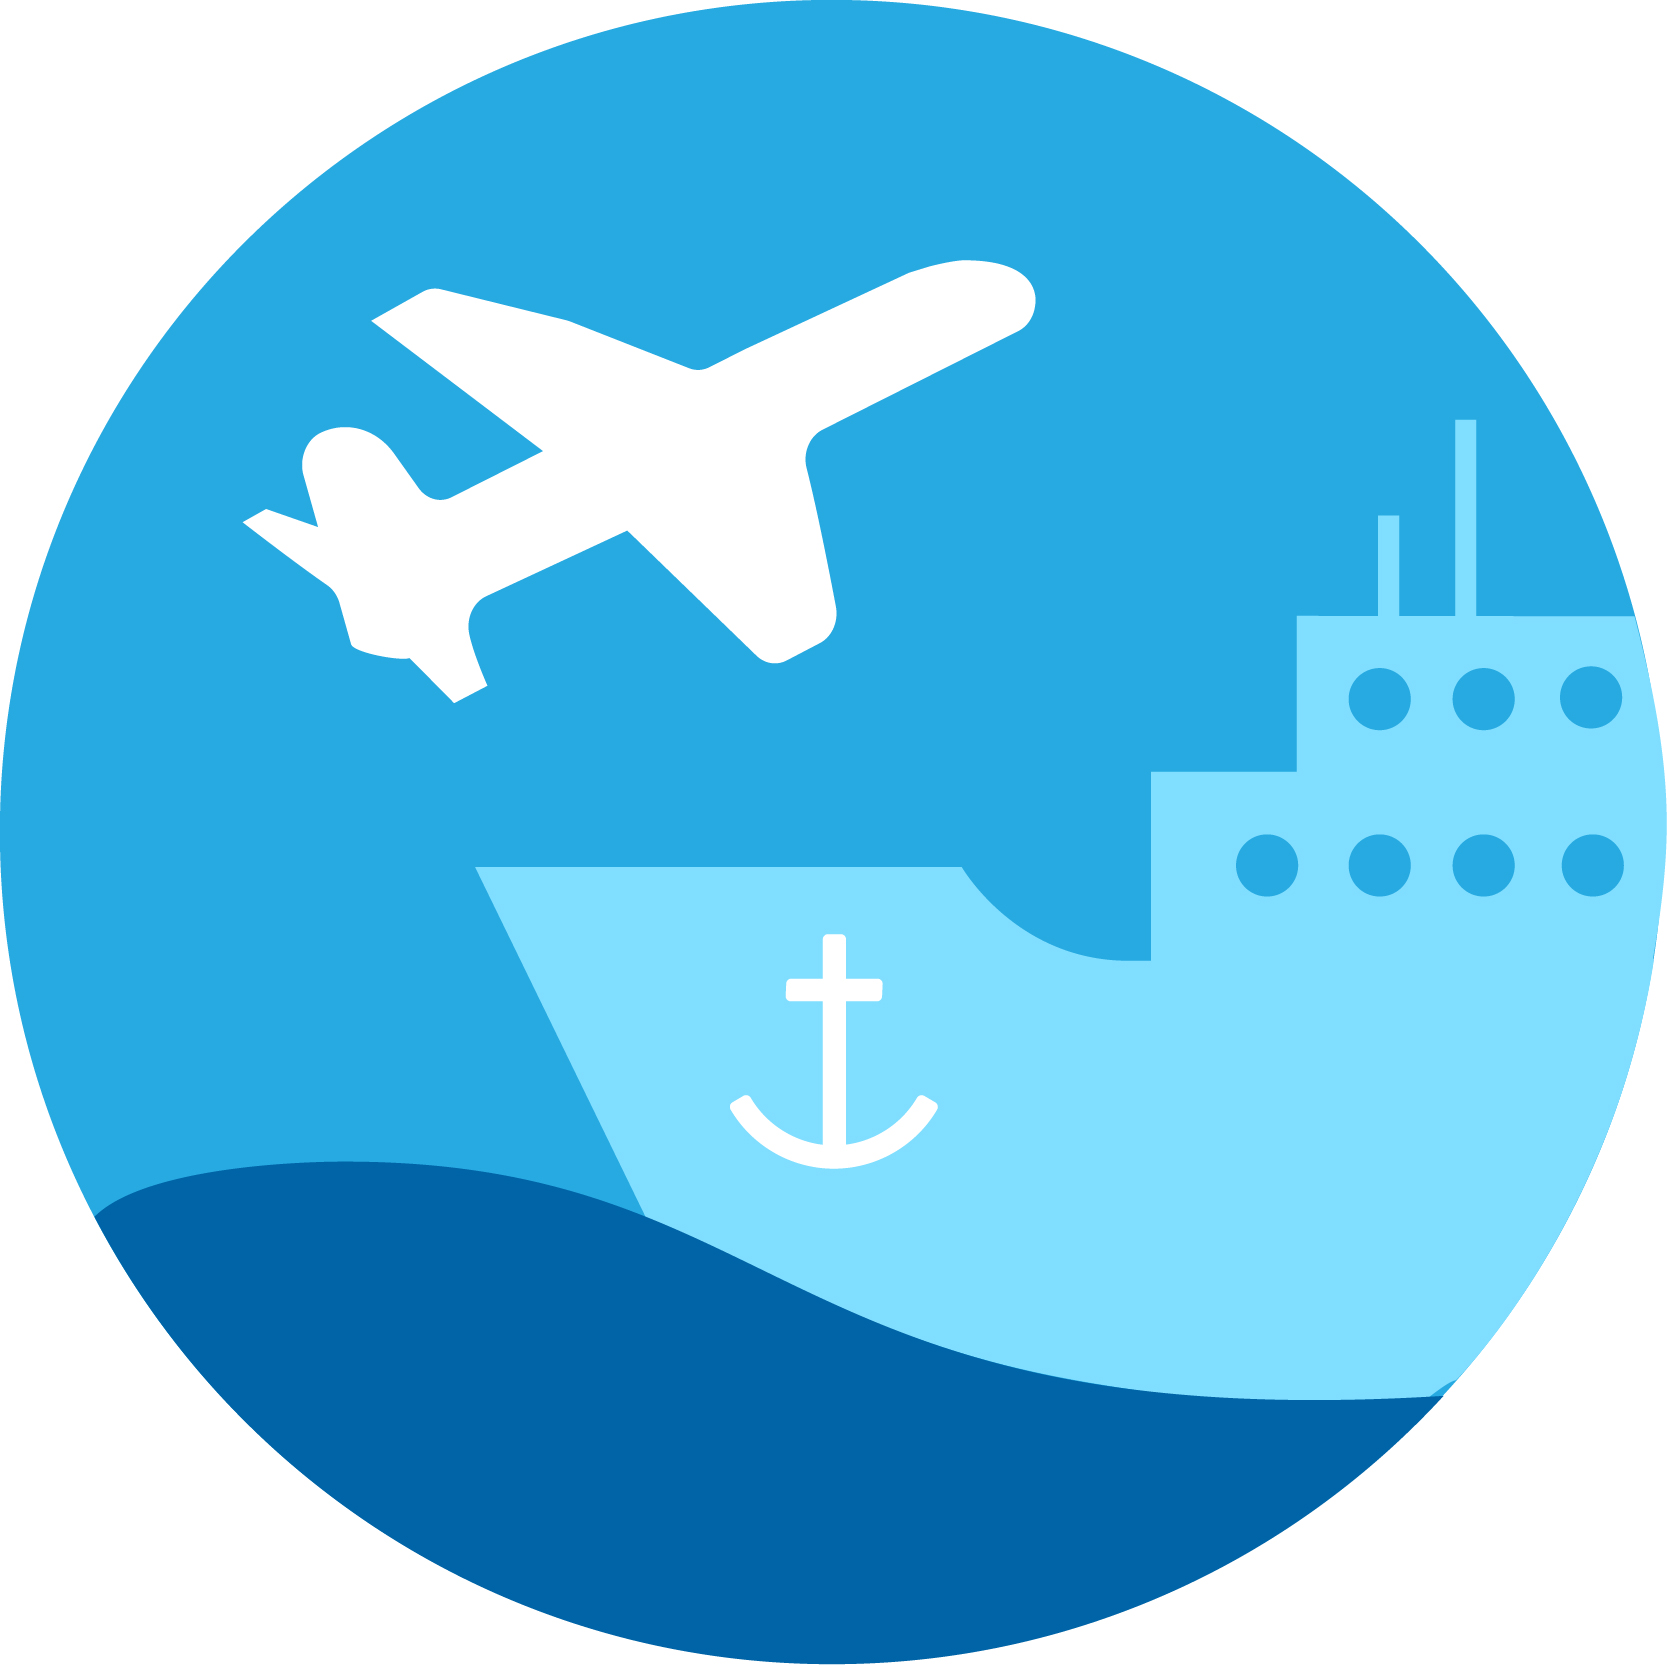 Airplane and ship icon